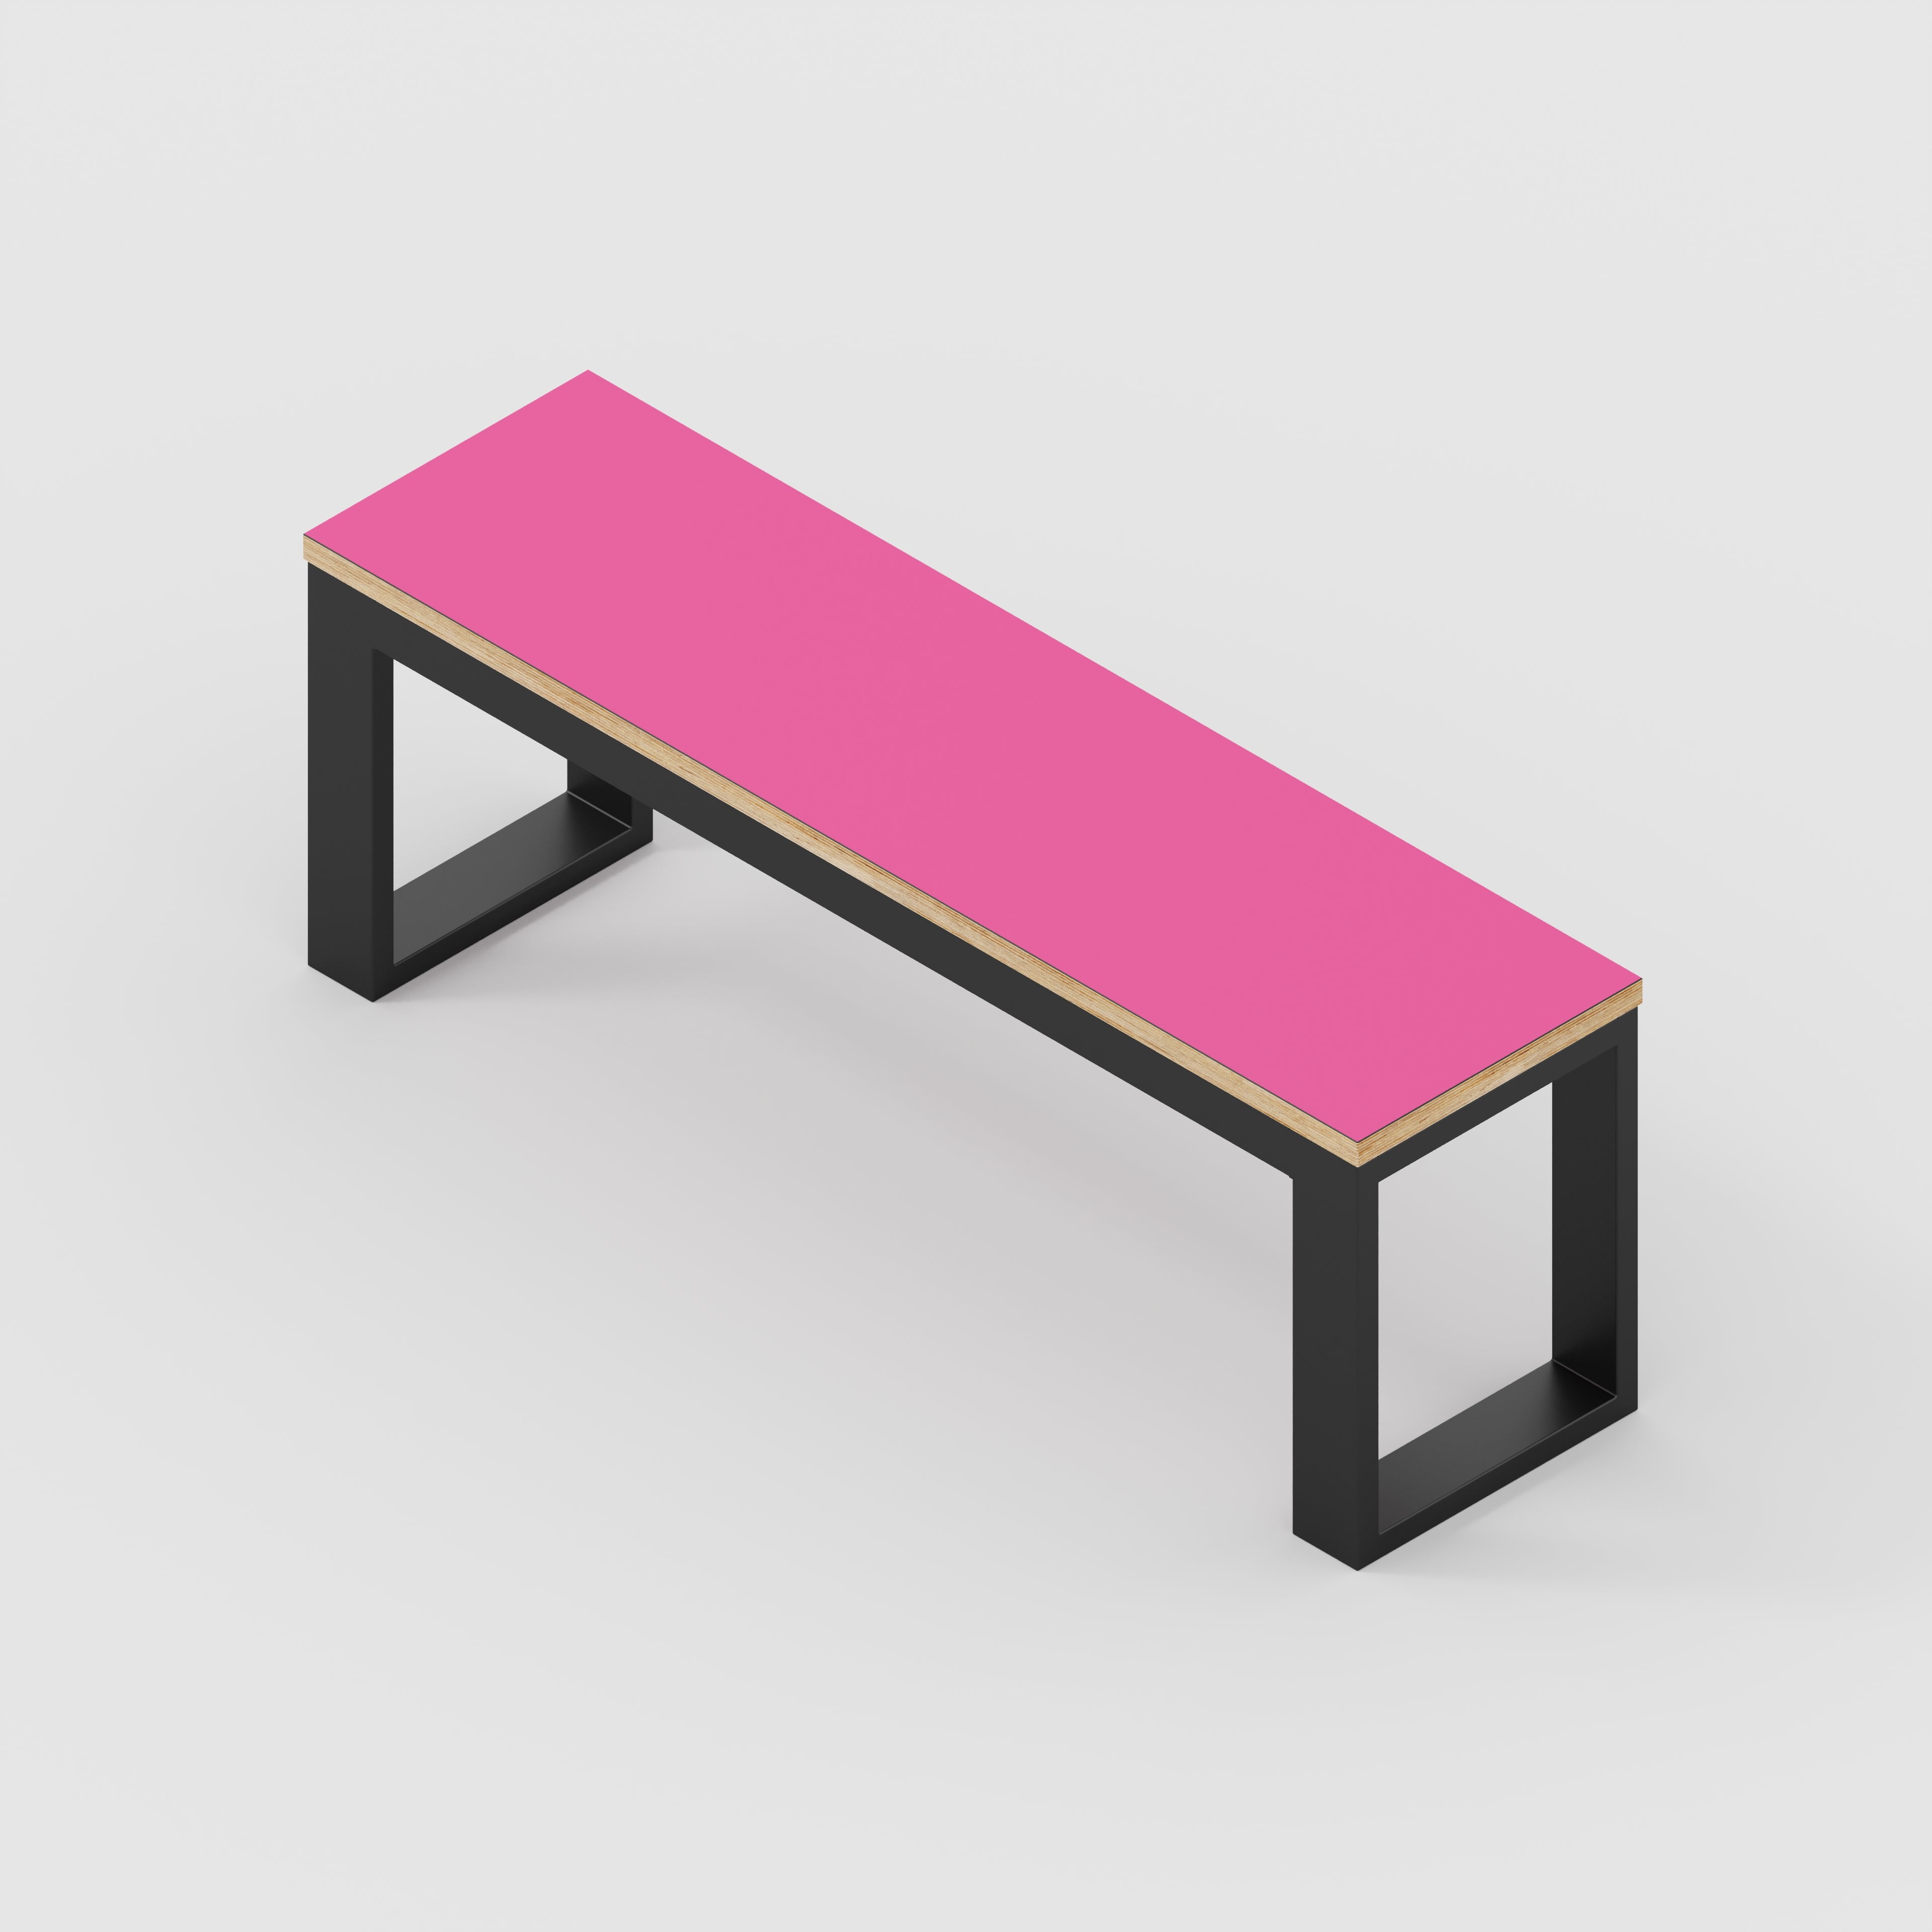 Bench Seat with Black Industrial Frame - Formica Juicy Pink - 1200(w) x 325(d)